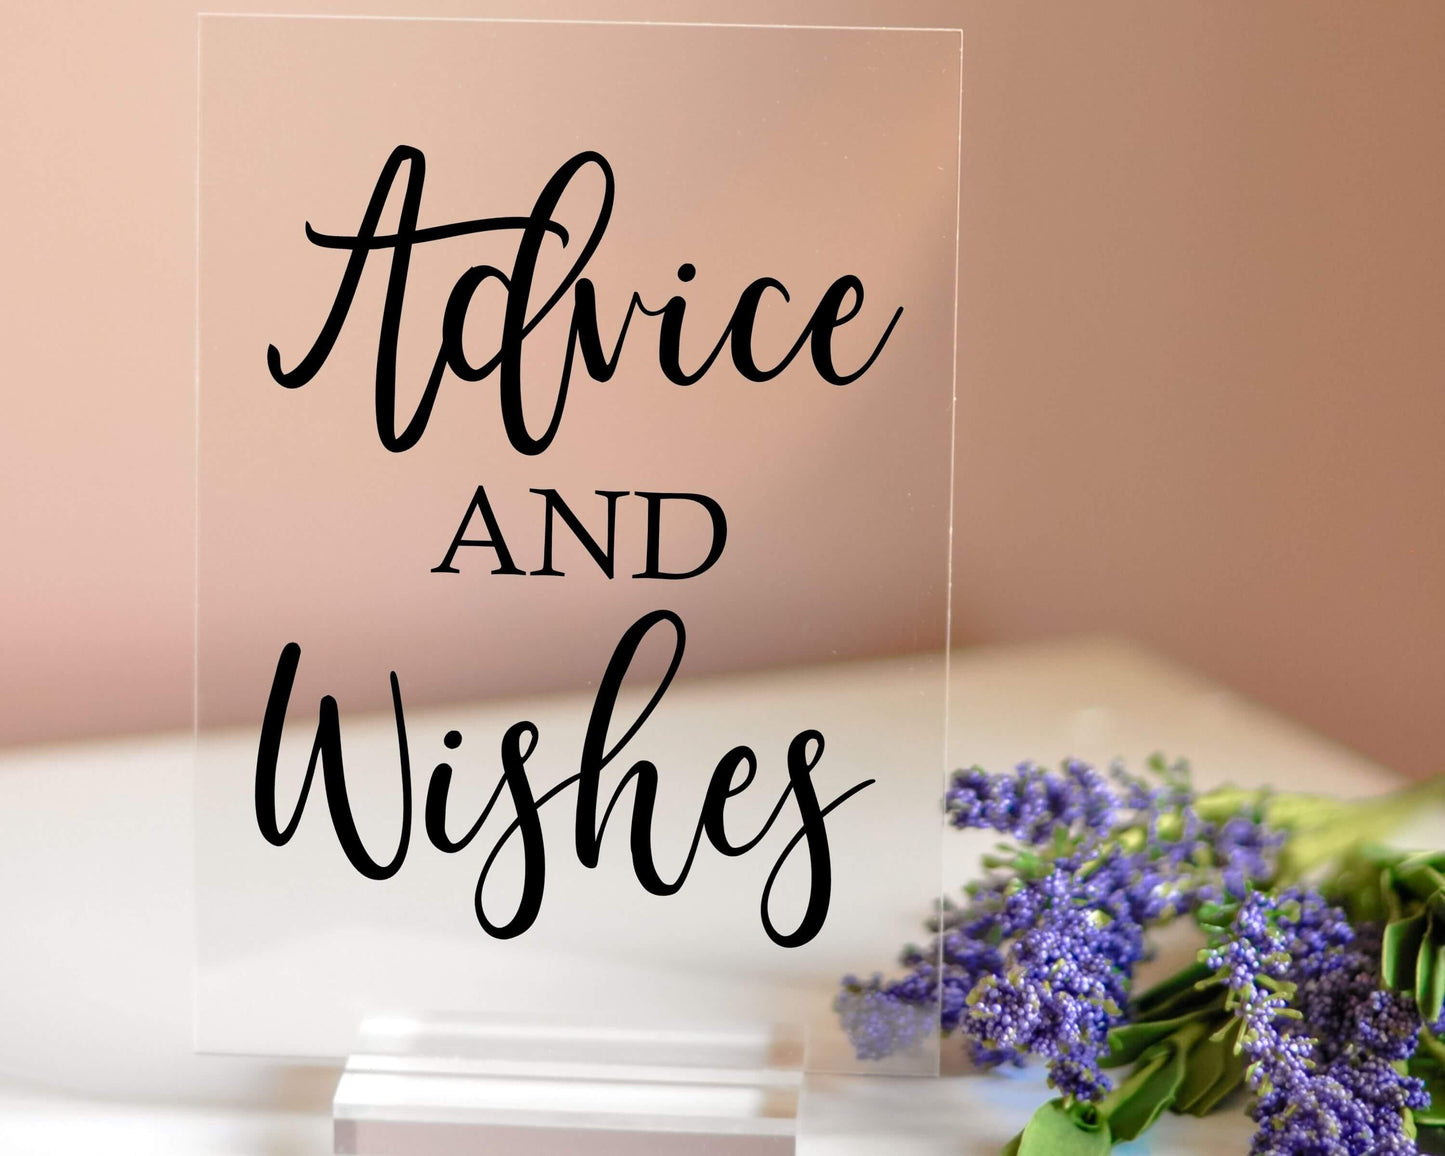 Advice and Wishes Acrylic Sign with Clear Background | 5 X 7"